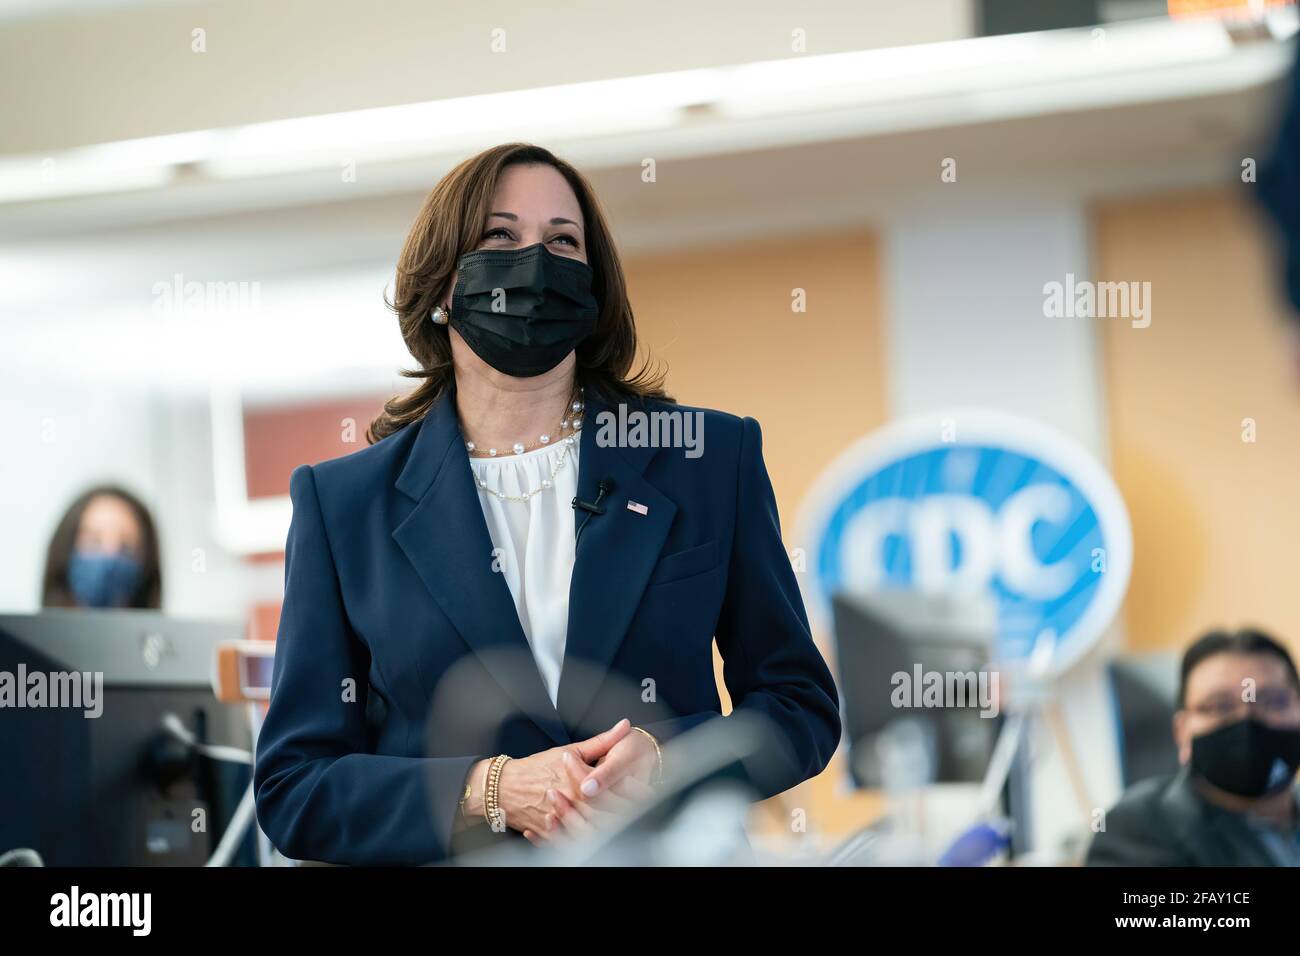 Vice President Kamala Harris listens during a briefing Friday, March 19, 2021, at the CDC Headquarters in Atlanta. (Official White House Photo by Adam Schultz) Stock Photo